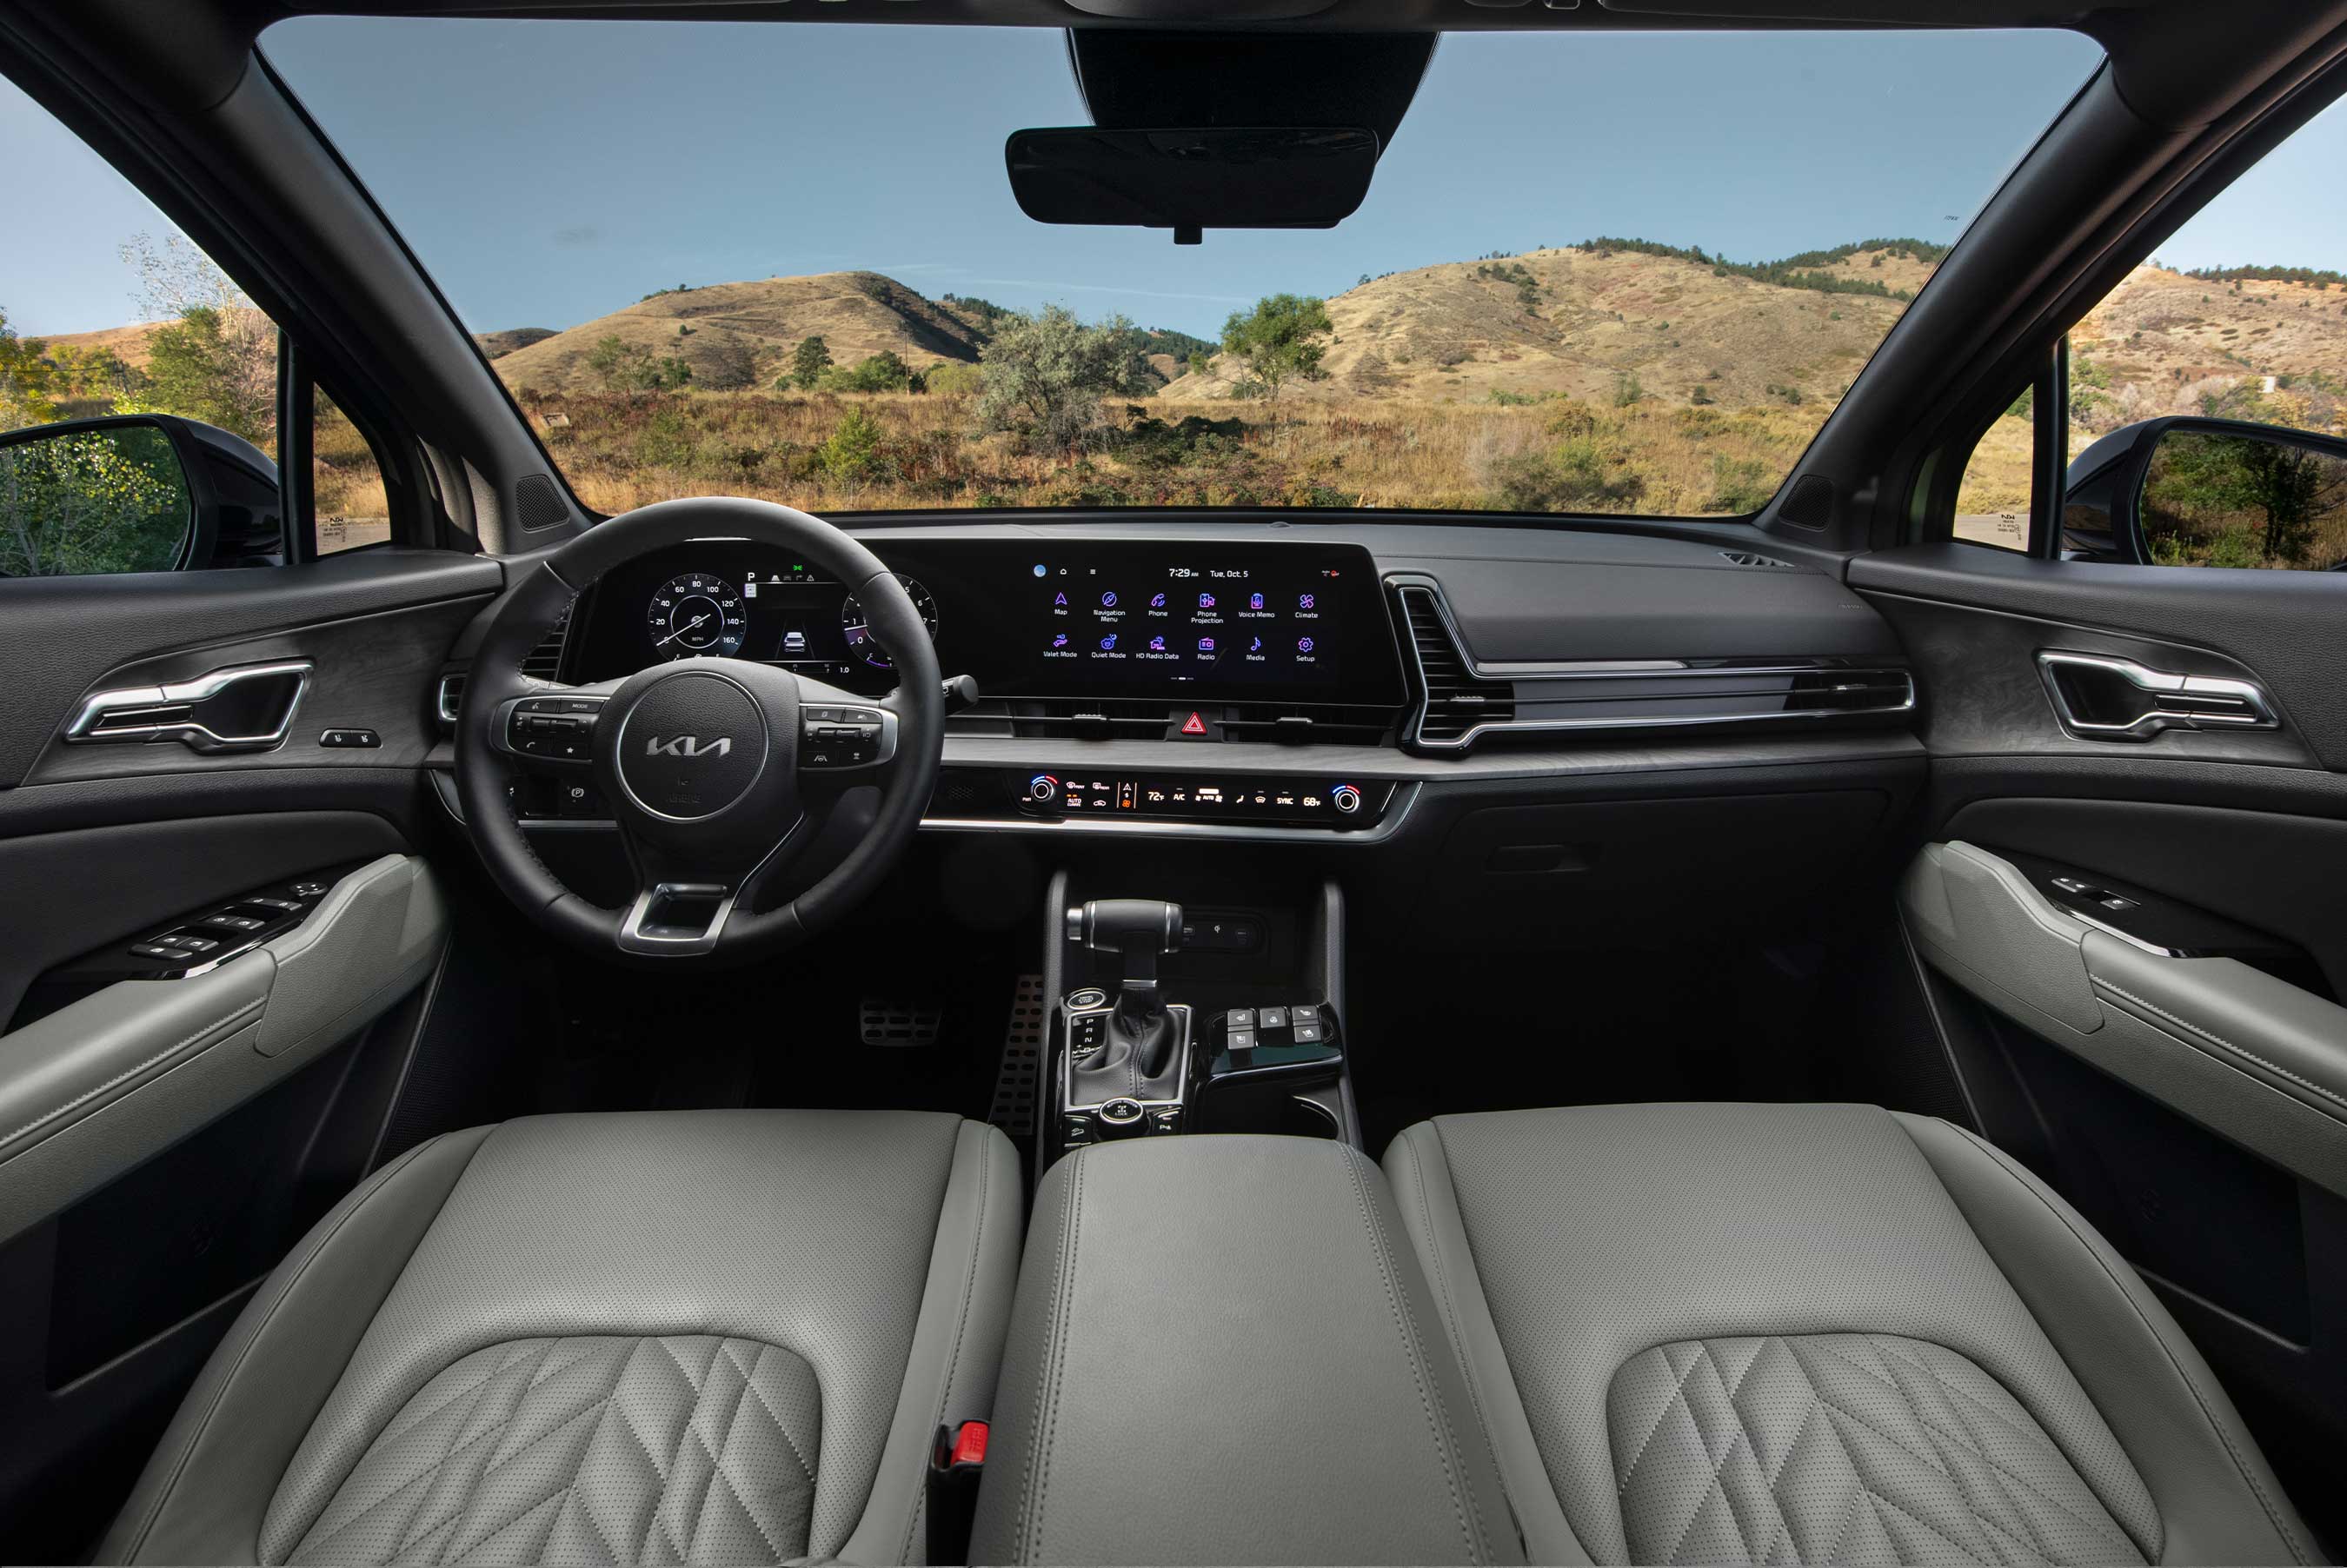 To match the high-tech interior, the all-new 2023 Kia Sportage SUV abounds with standard and available infotainment to keep drivers connected, confident, and informed of what’s going on around them.